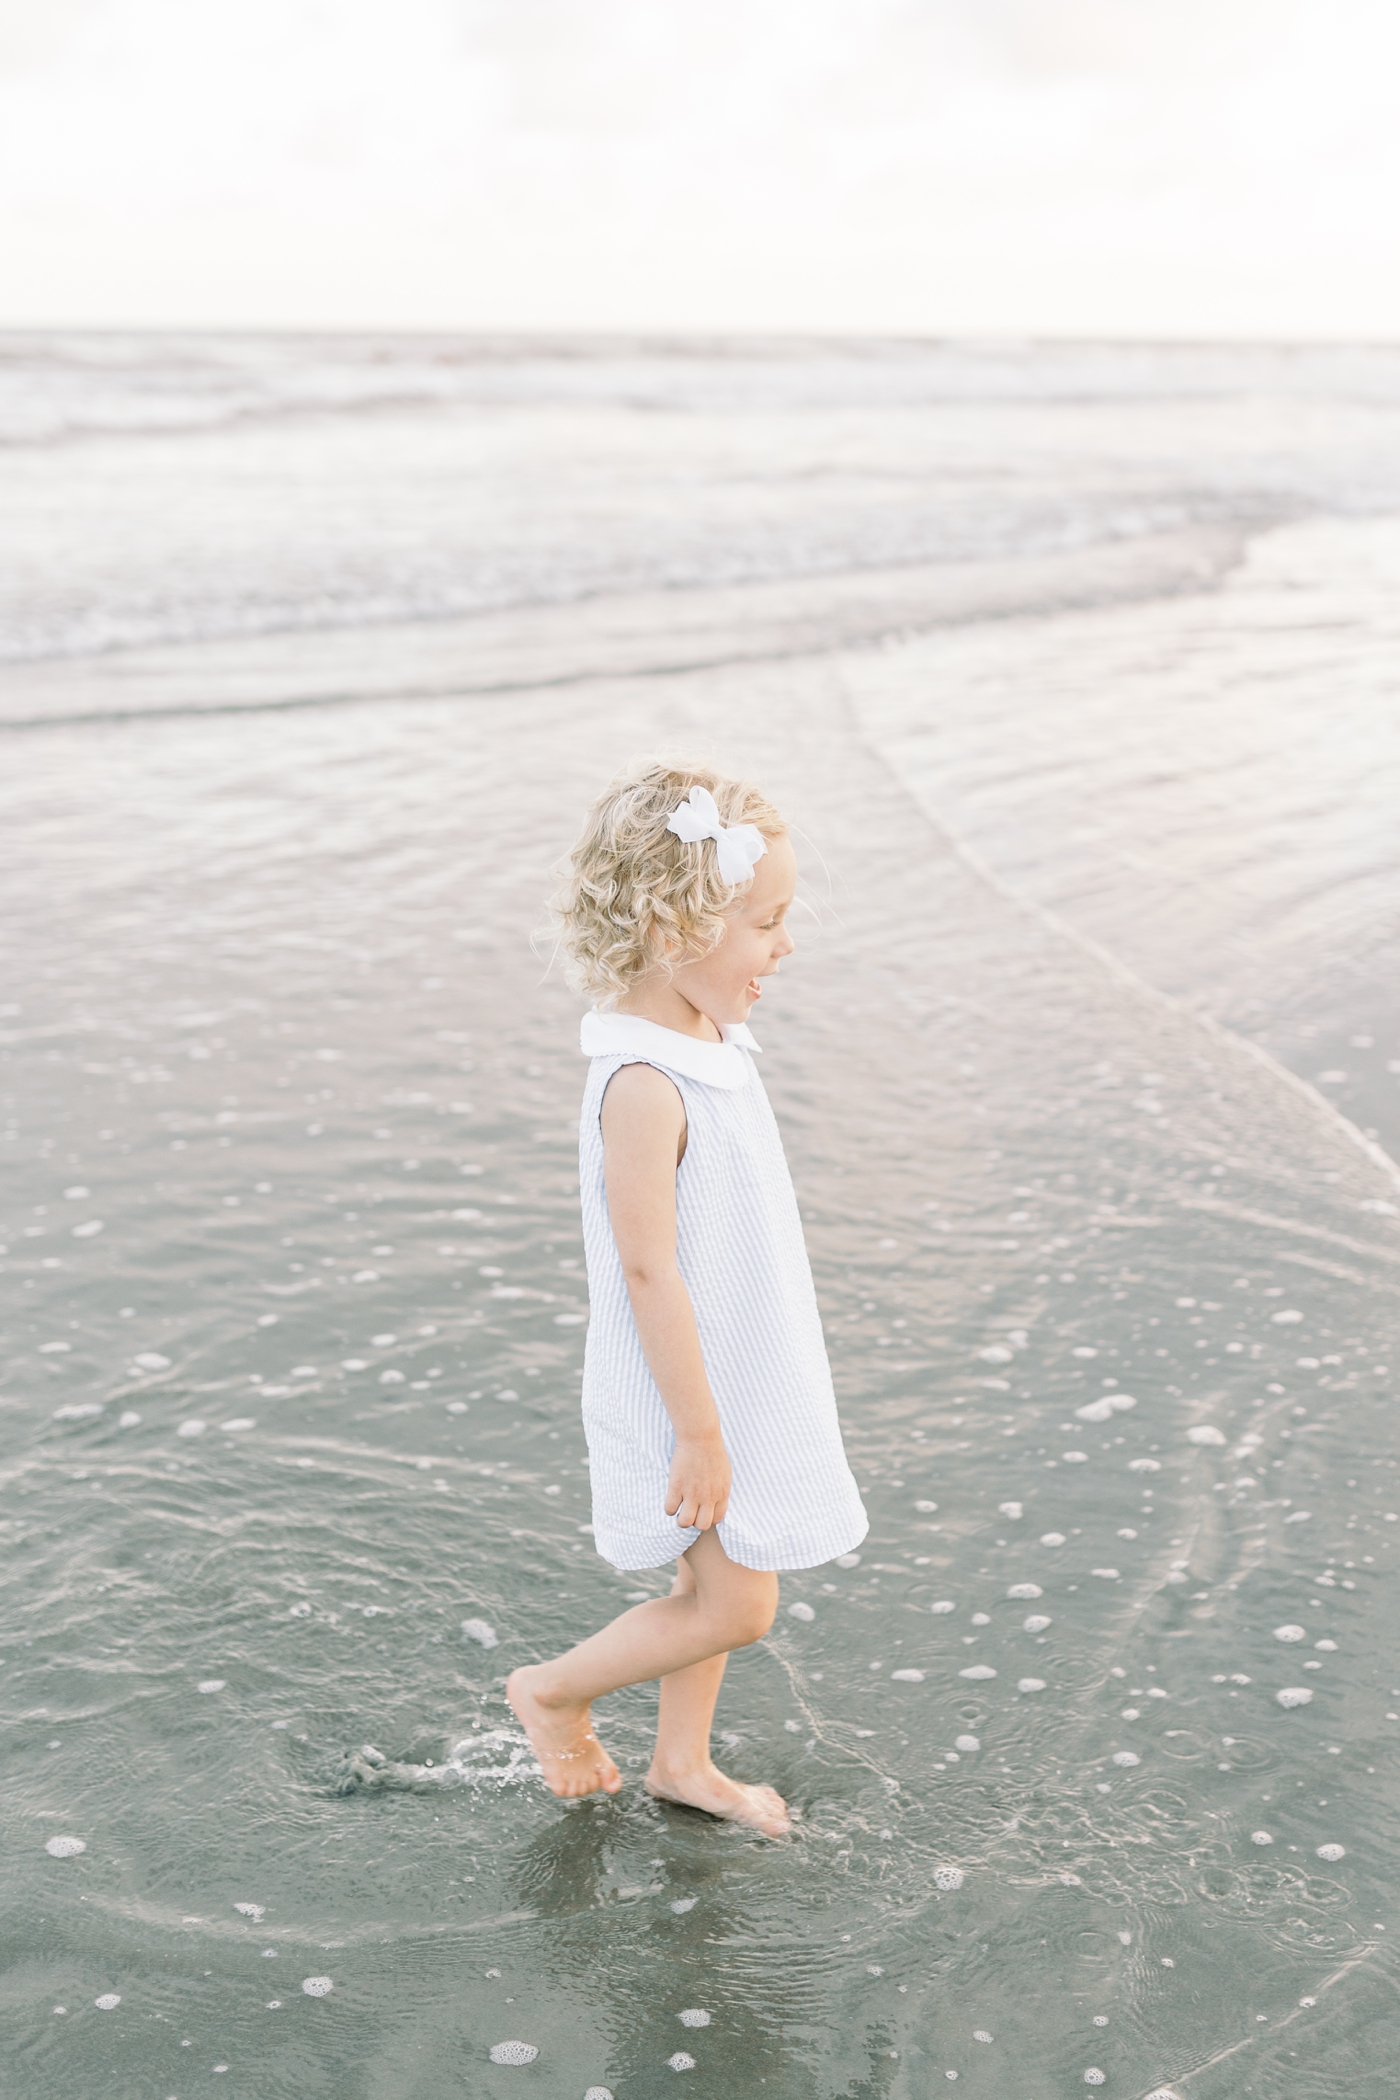 Little girl playing in the ocean | Photo by Caitlyn Motycka Photography.